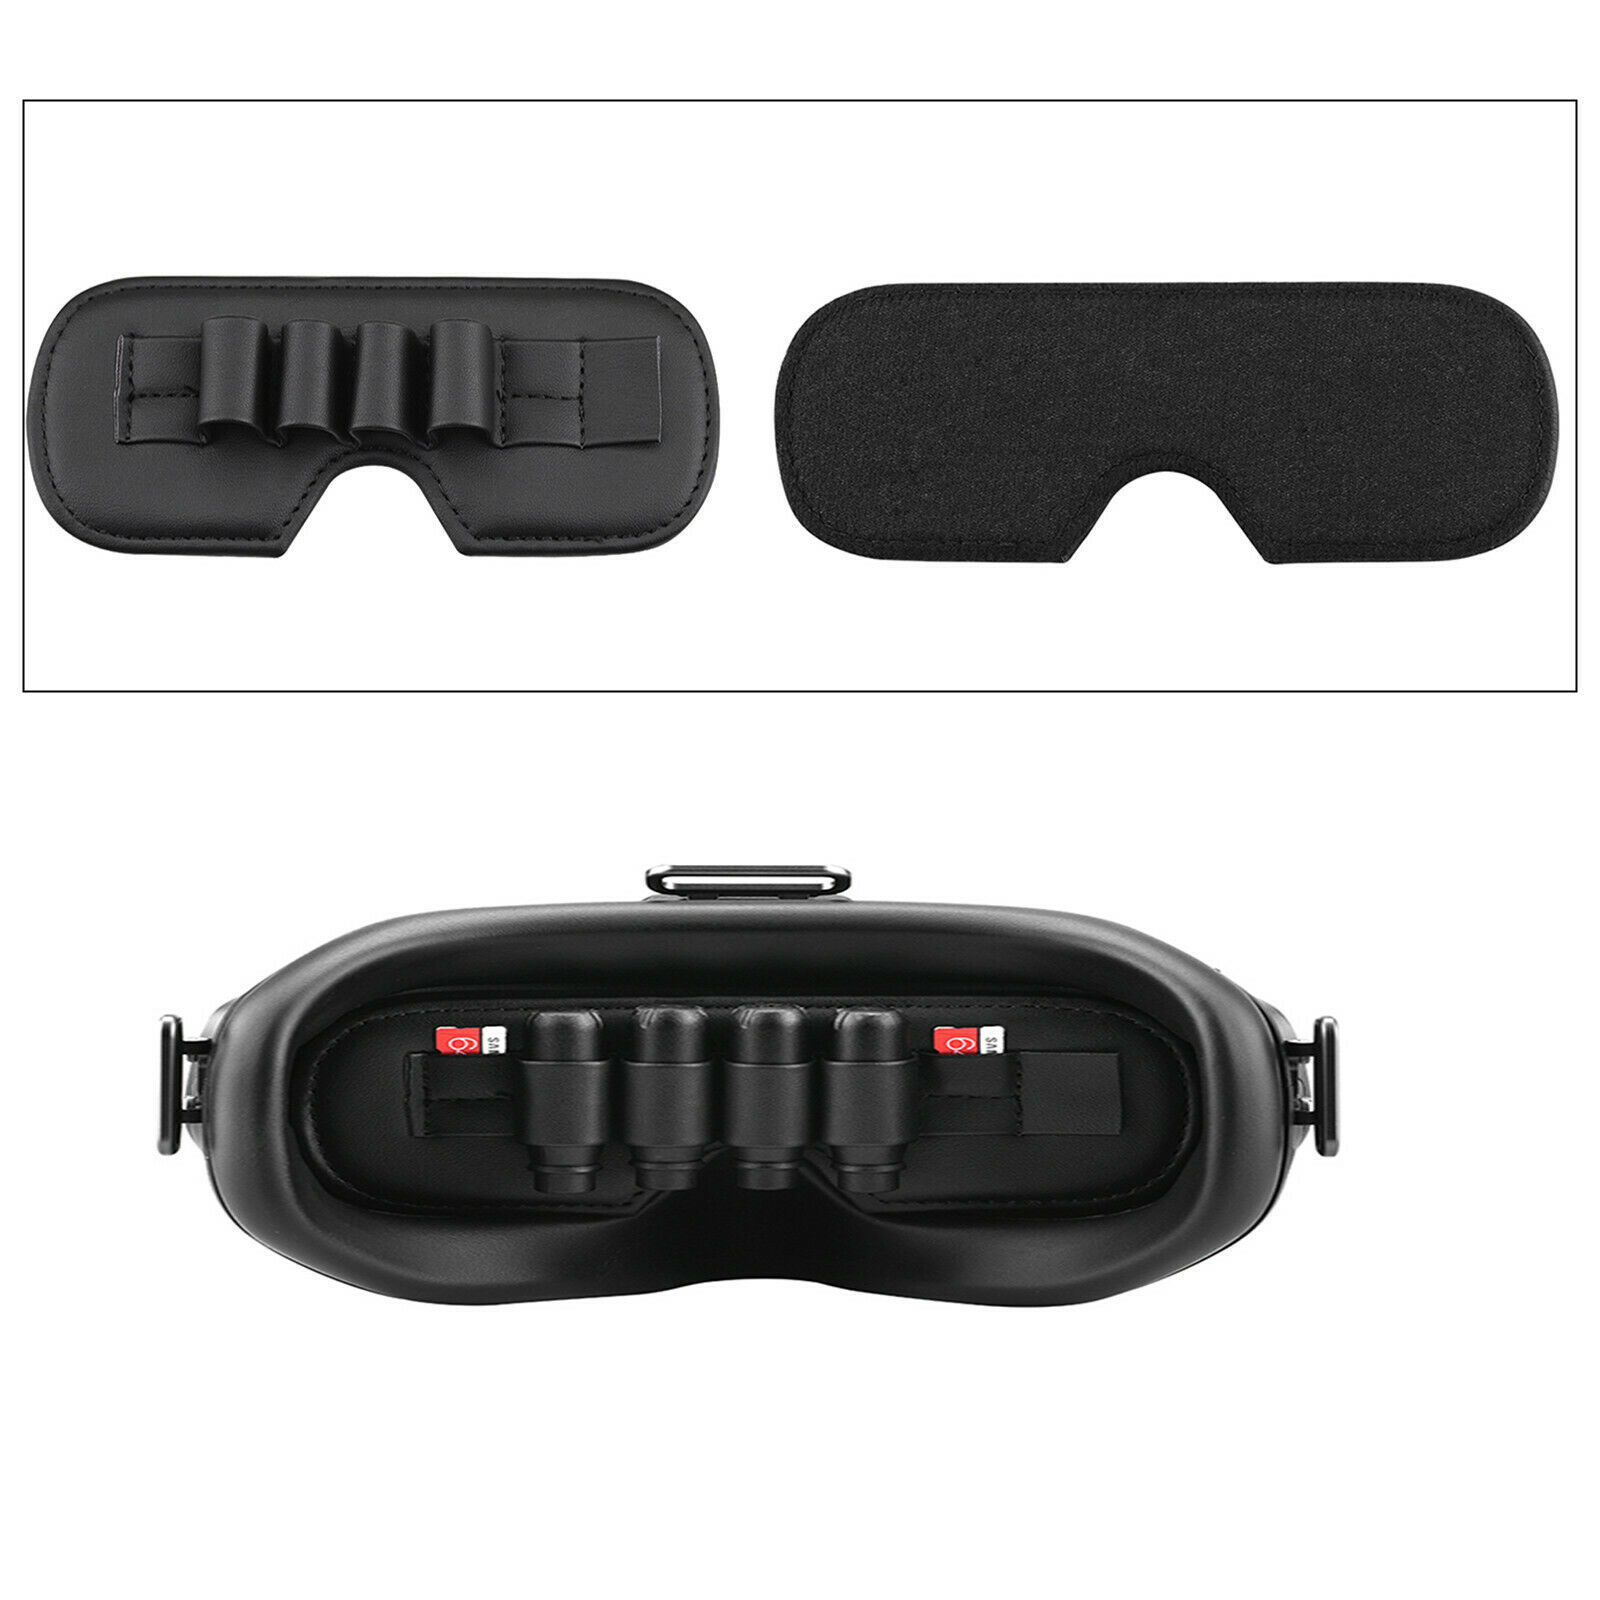 Dustproof Lens Cover Pad Antenna Storage Cover Mat For Fpv Goggles V2 Glasses